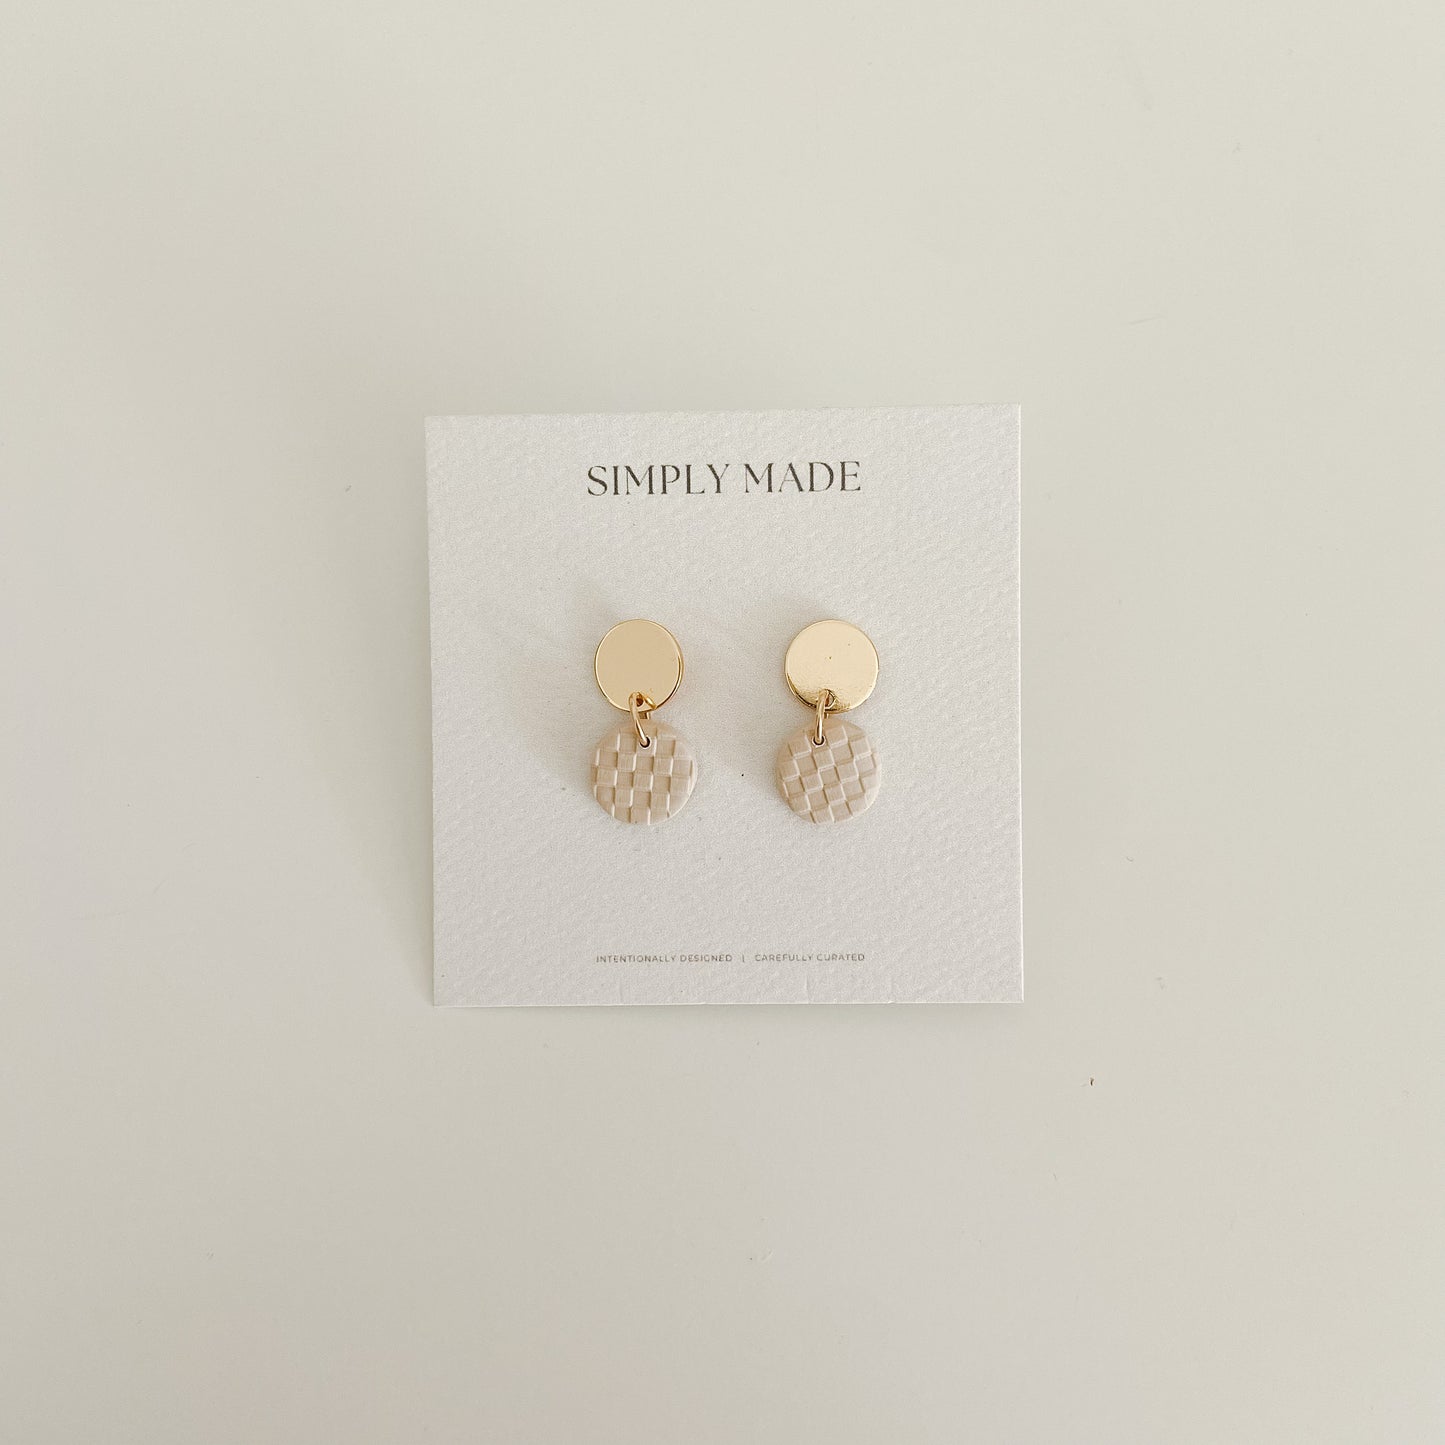 Checkered #1 — clay earrings